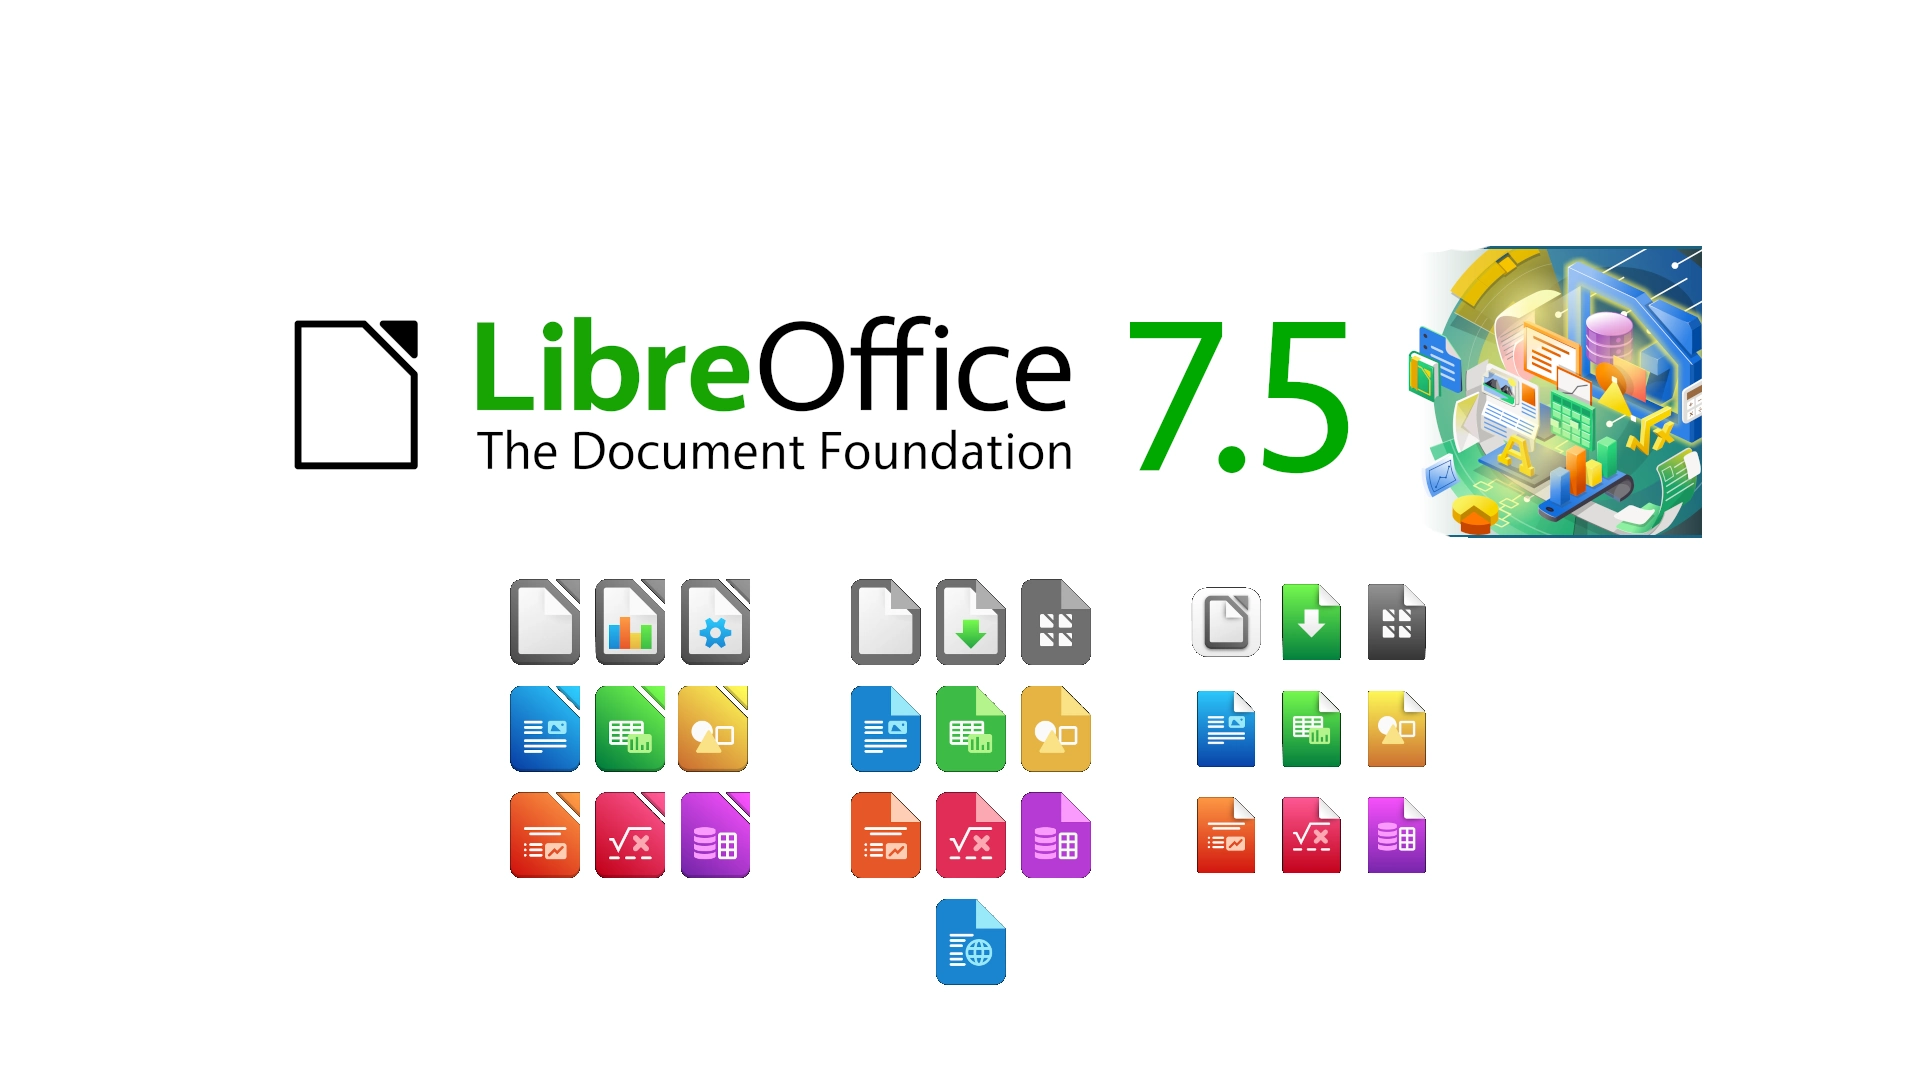 LibreOffice 7.5.1 Brings New Light/Dark Mode Switch, Fixes More Than 90 Bugs